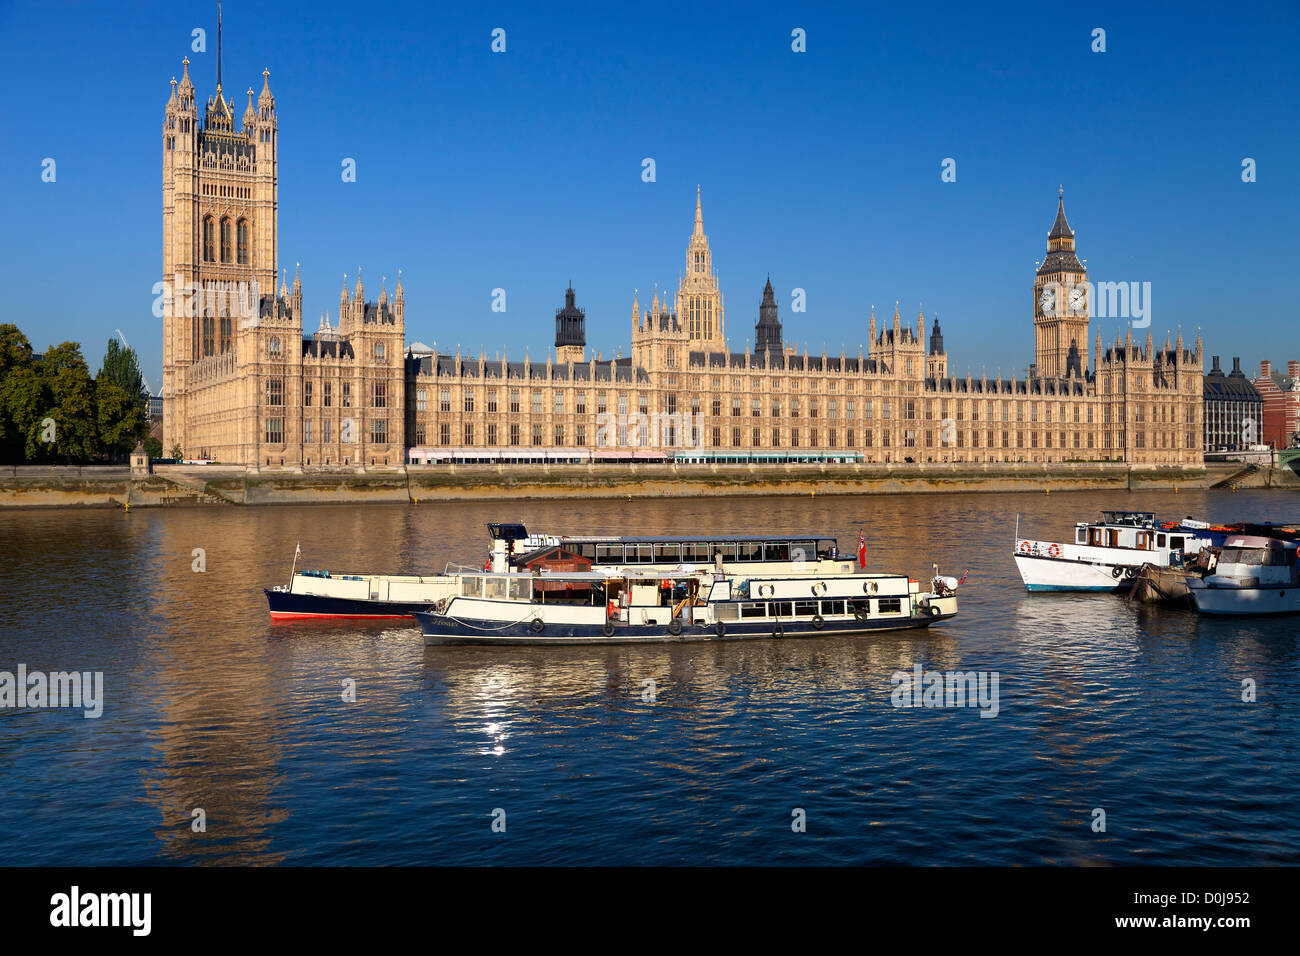 A view toward The Palace of Westminster on an autumn morning. Stock Photo